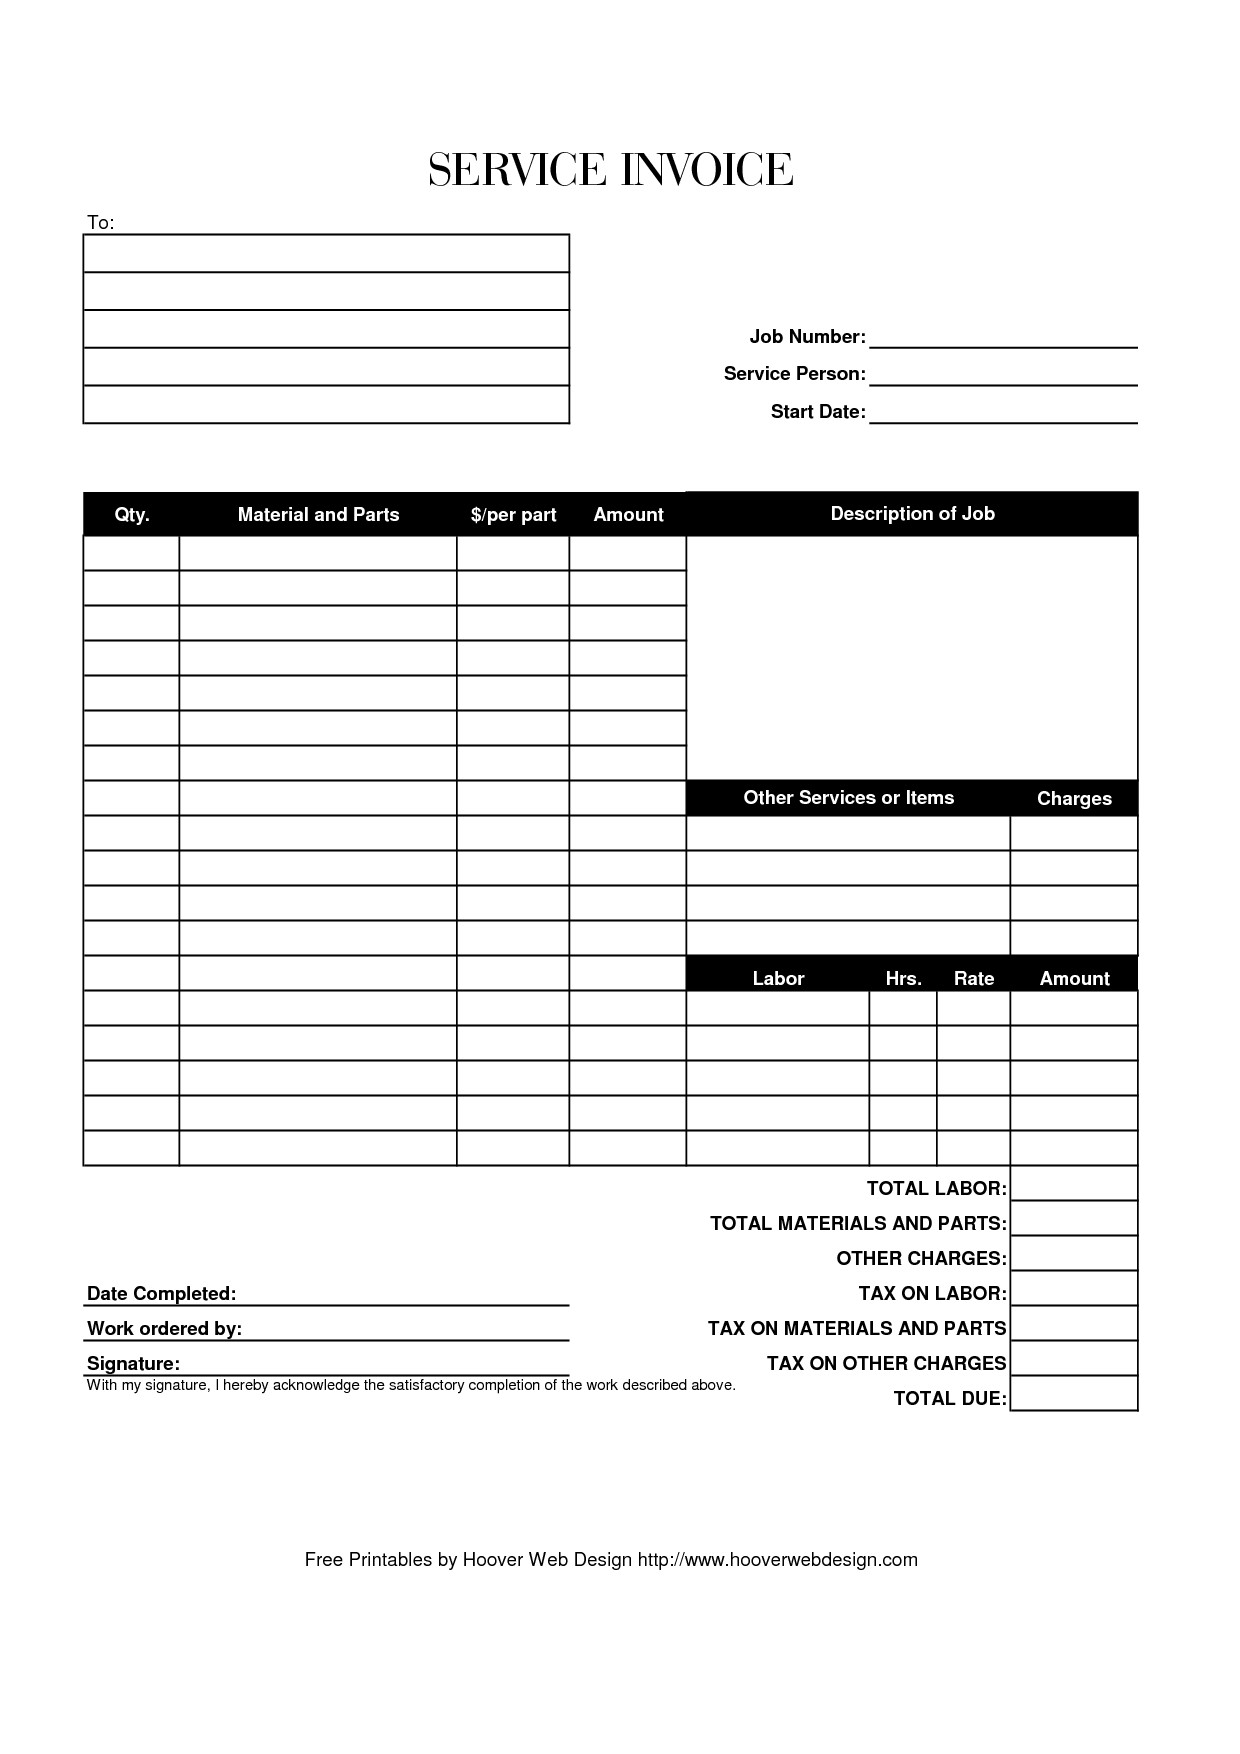 Service Invoice Template Free Hoover Receipts